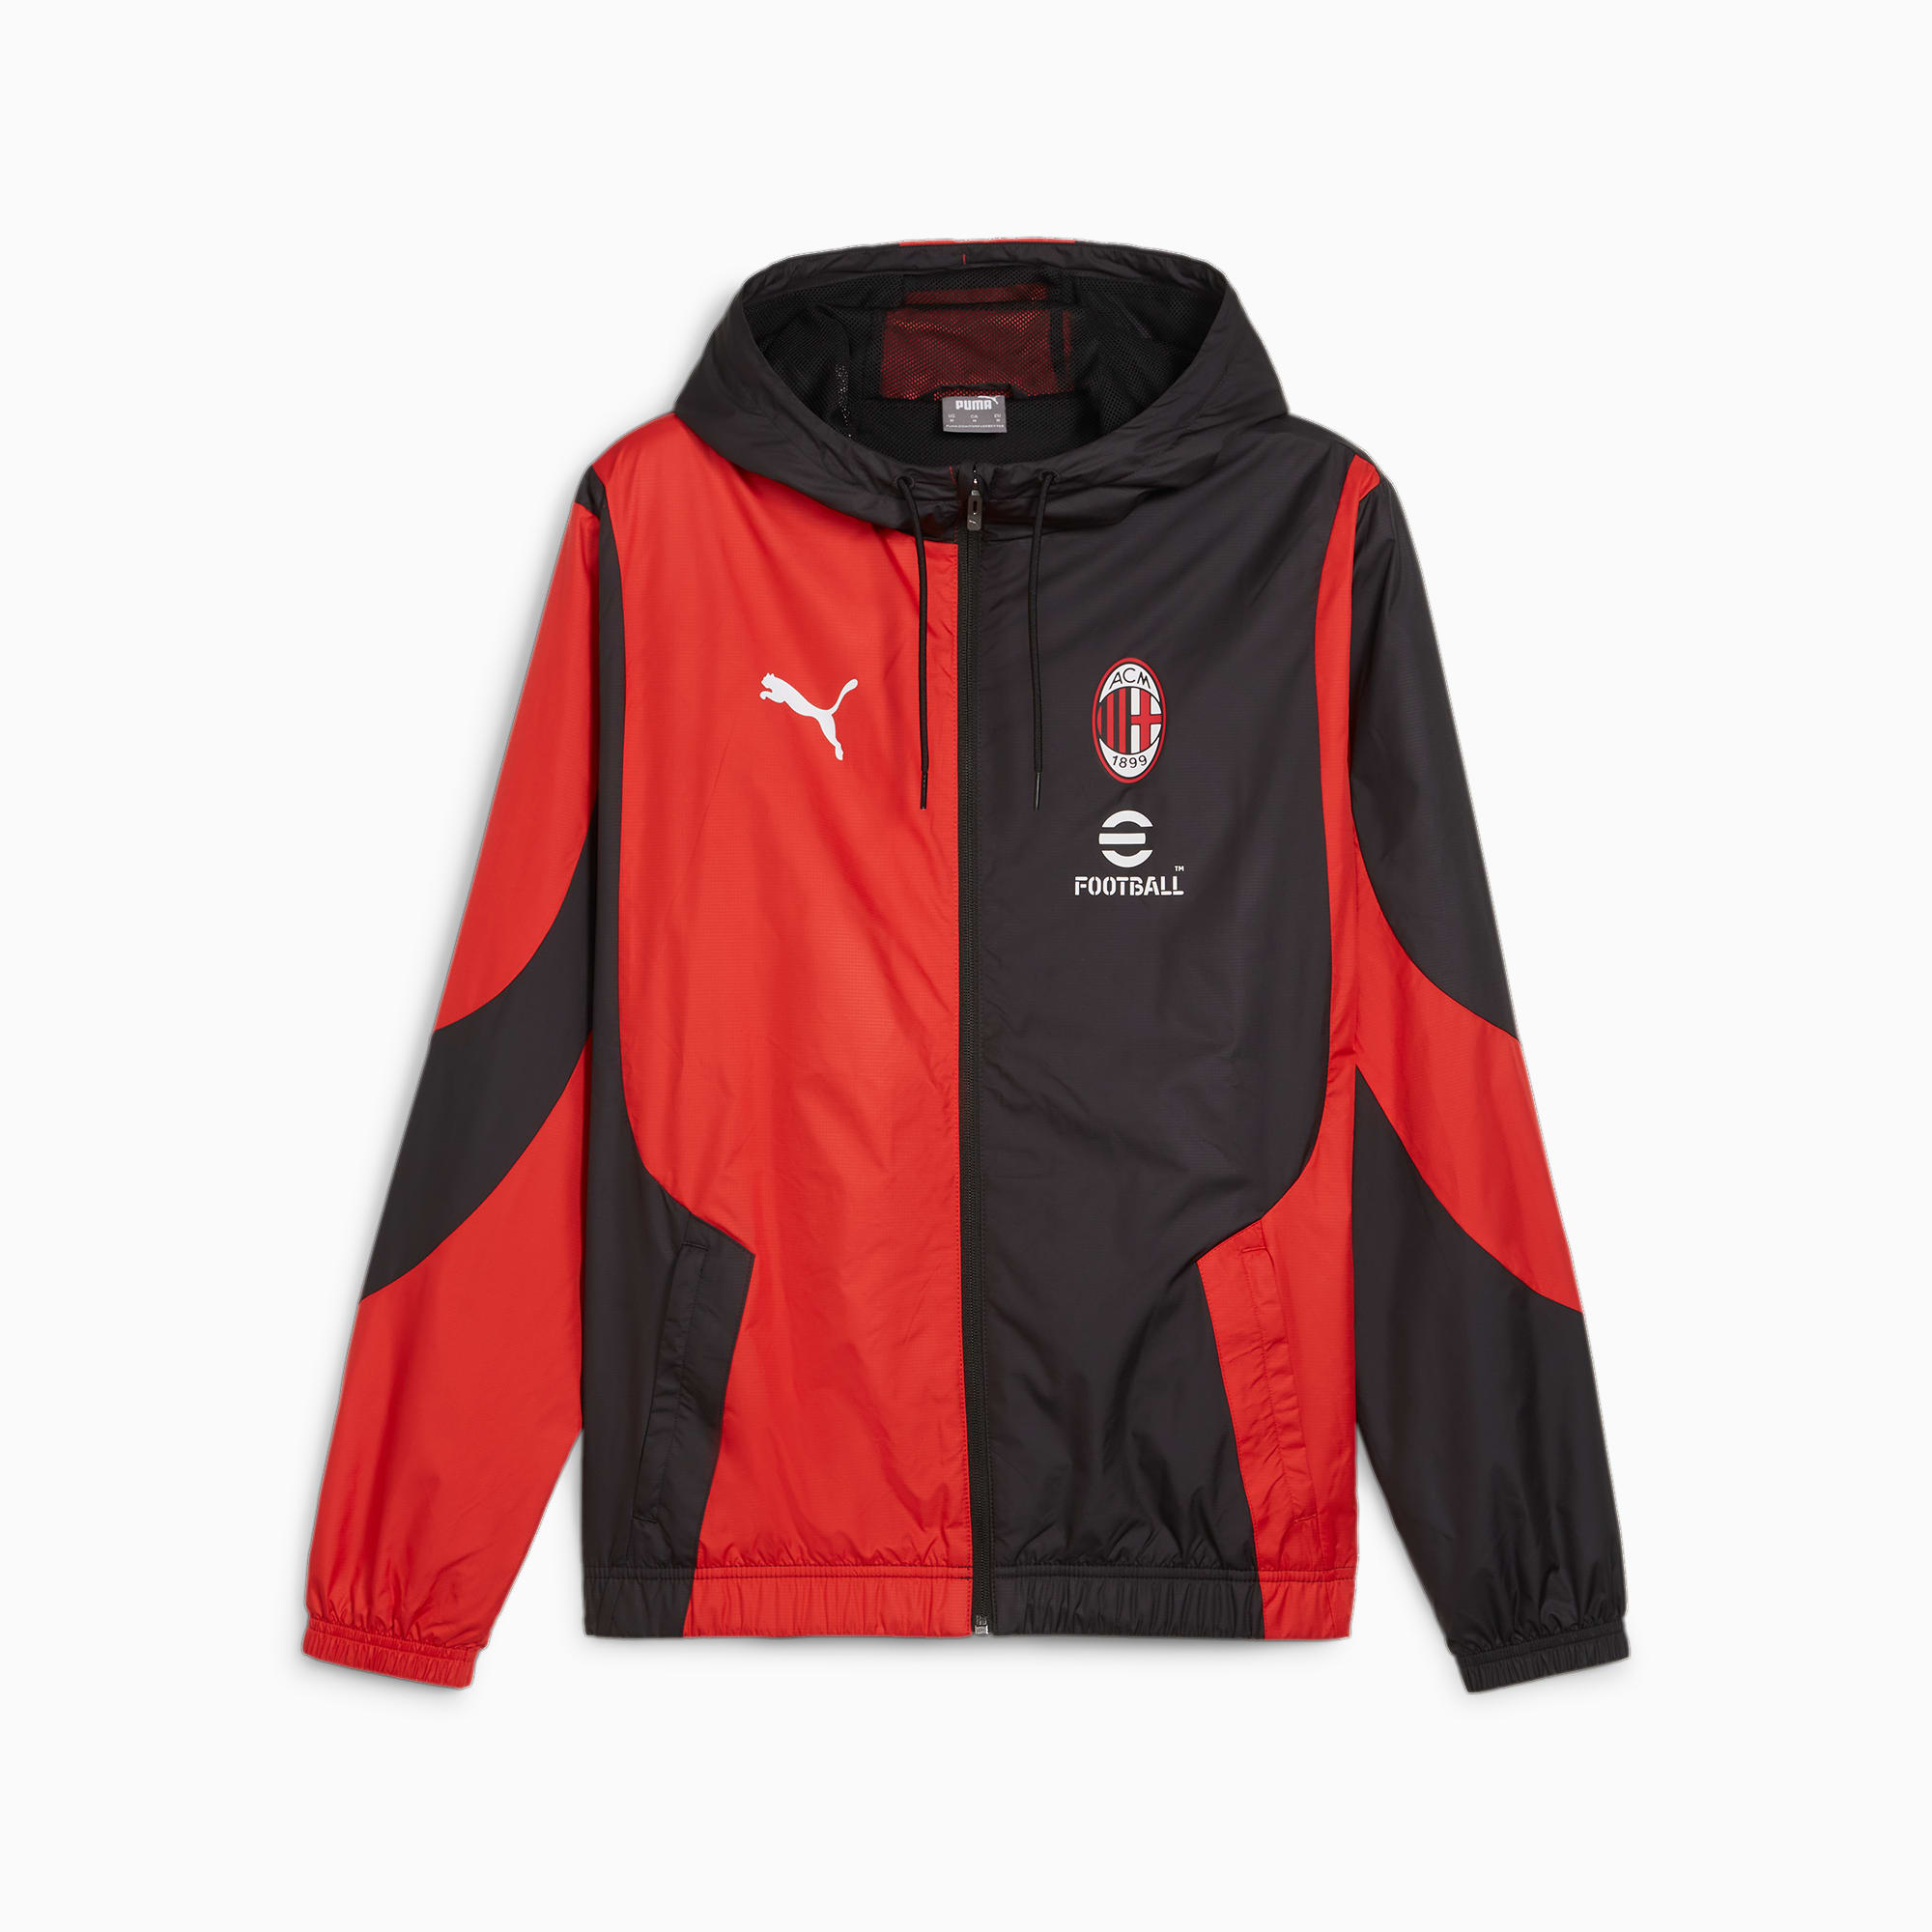 Men's PUMA AC Milan Pre-Match Jacket, Black/For All Time Red, Size M, Clothing